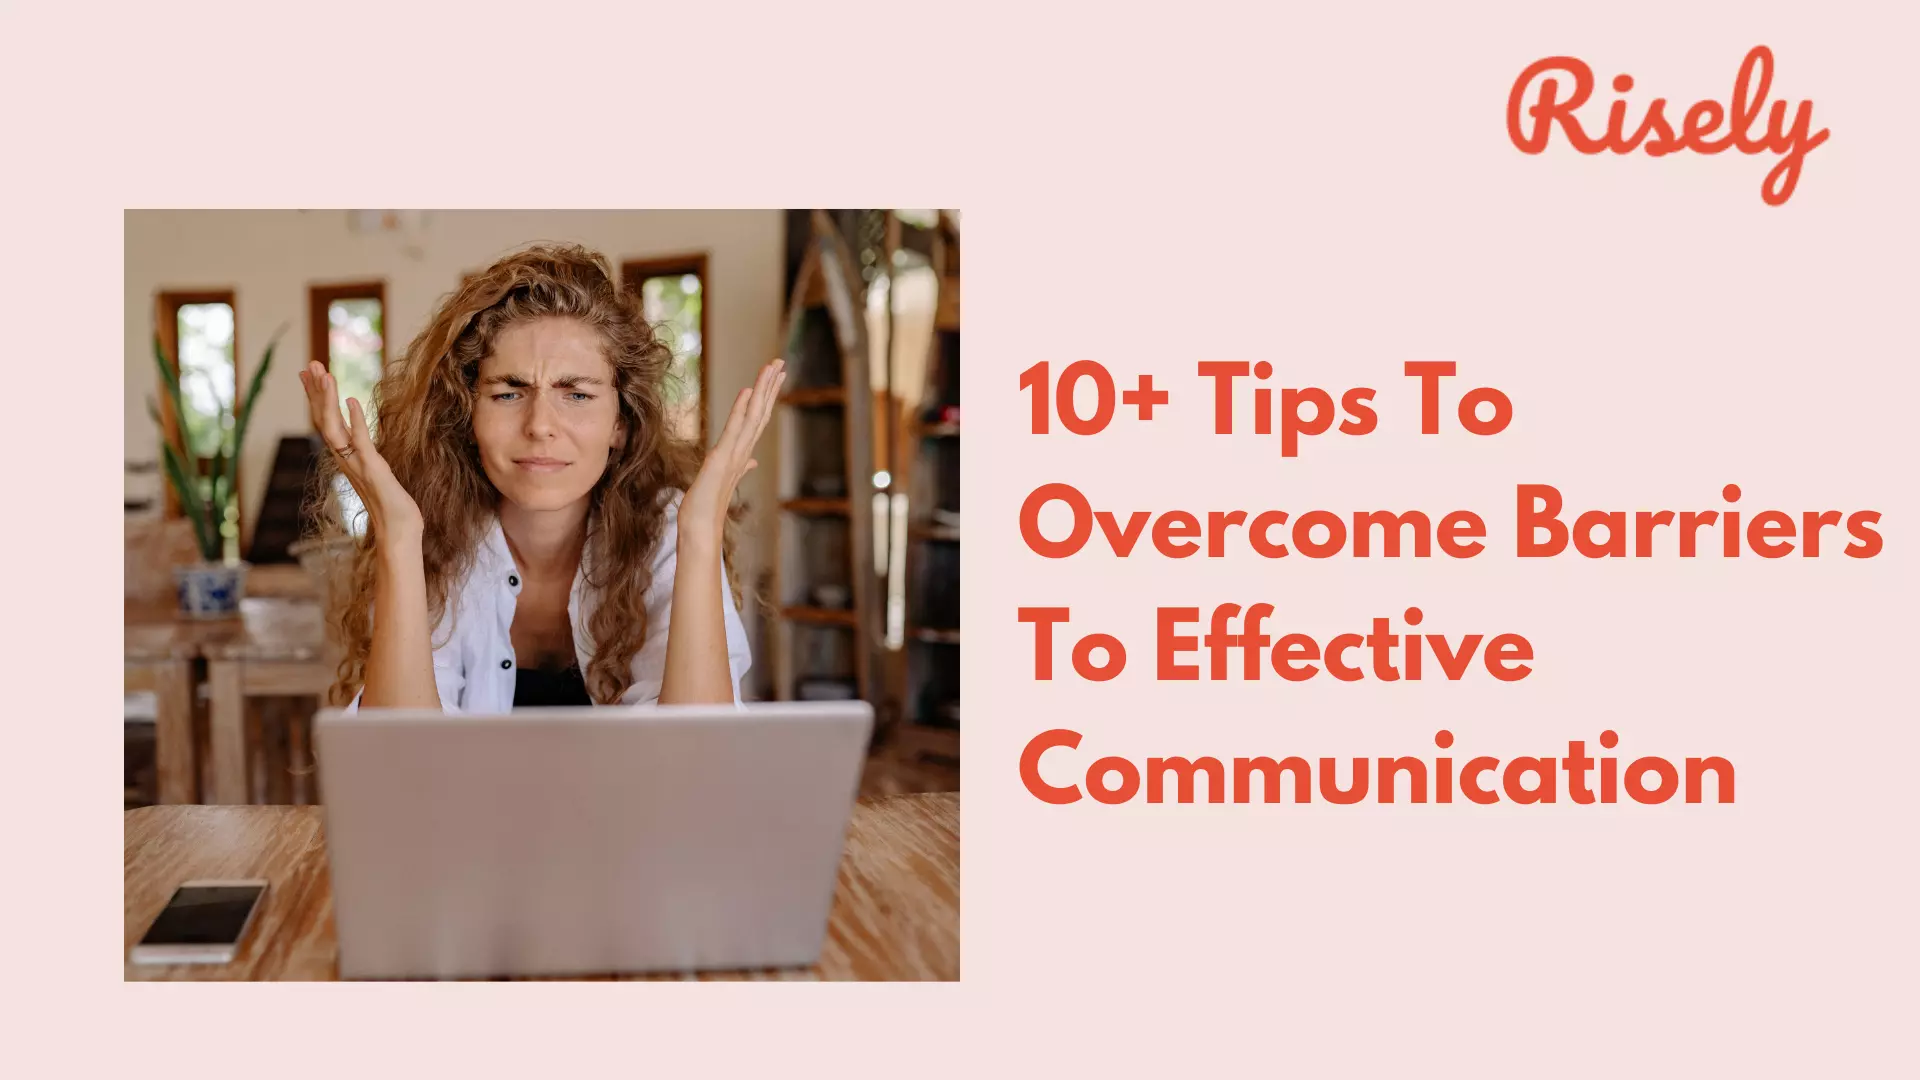 How to overcome barriers to effective communication